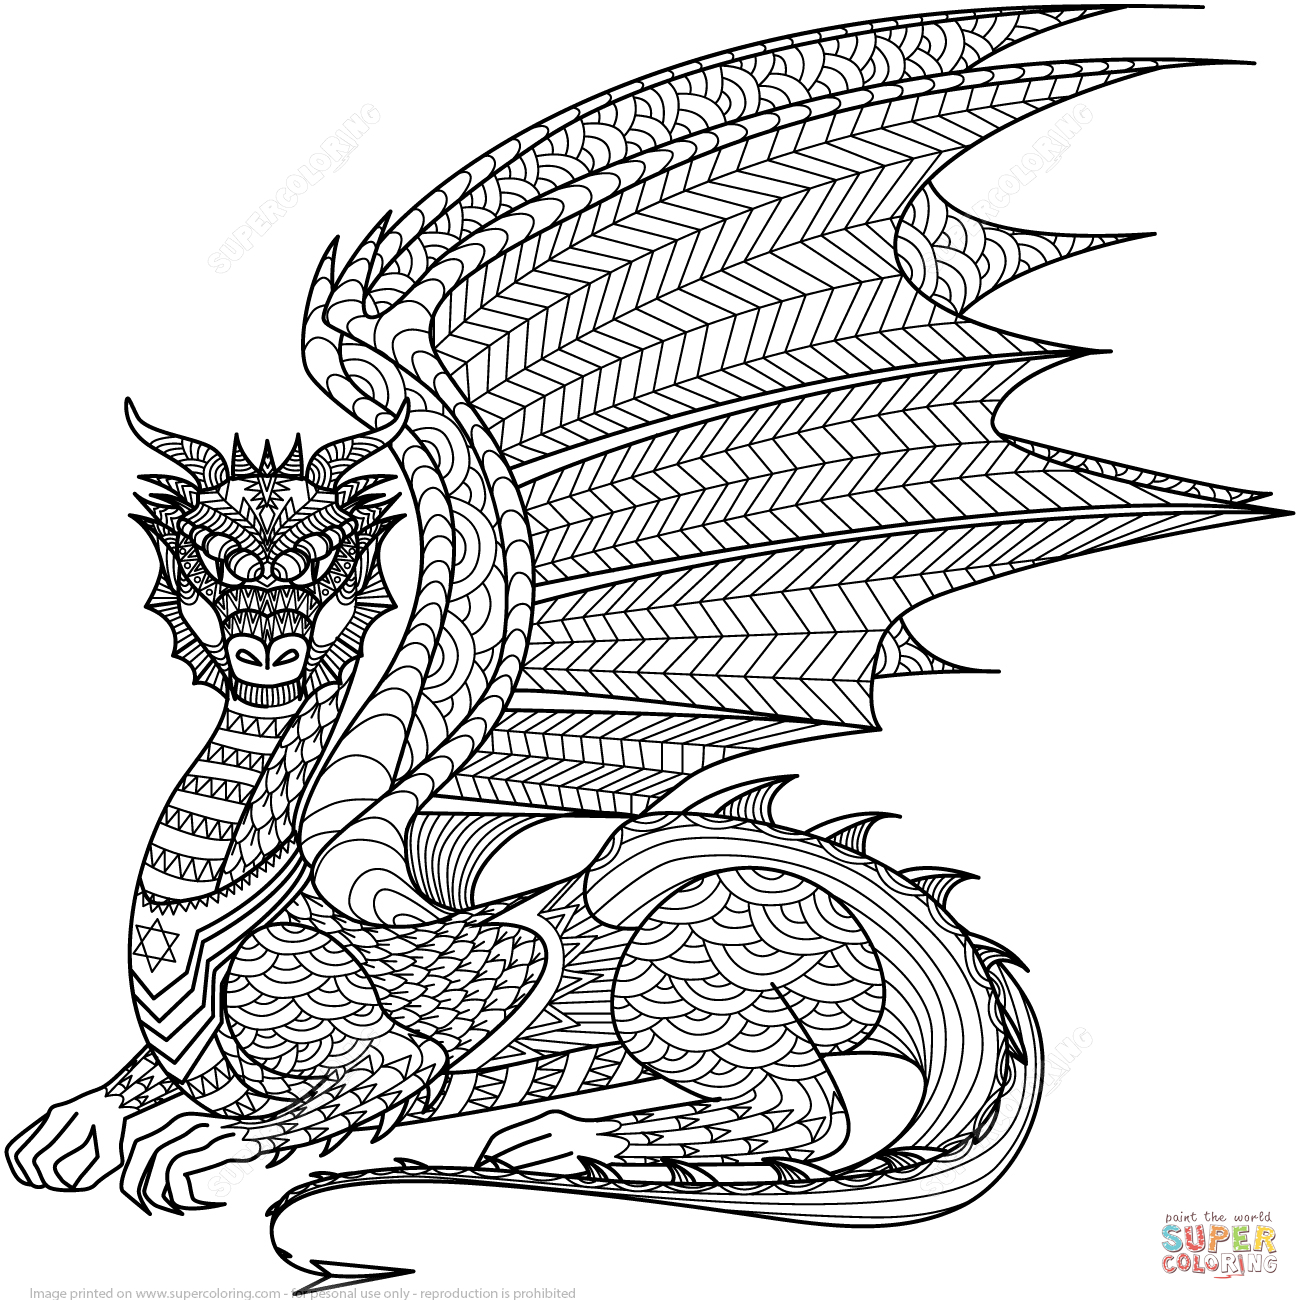 Coloring Pages Zen Dragon Zentangle Coloring Page Free Printable Coloring Pages